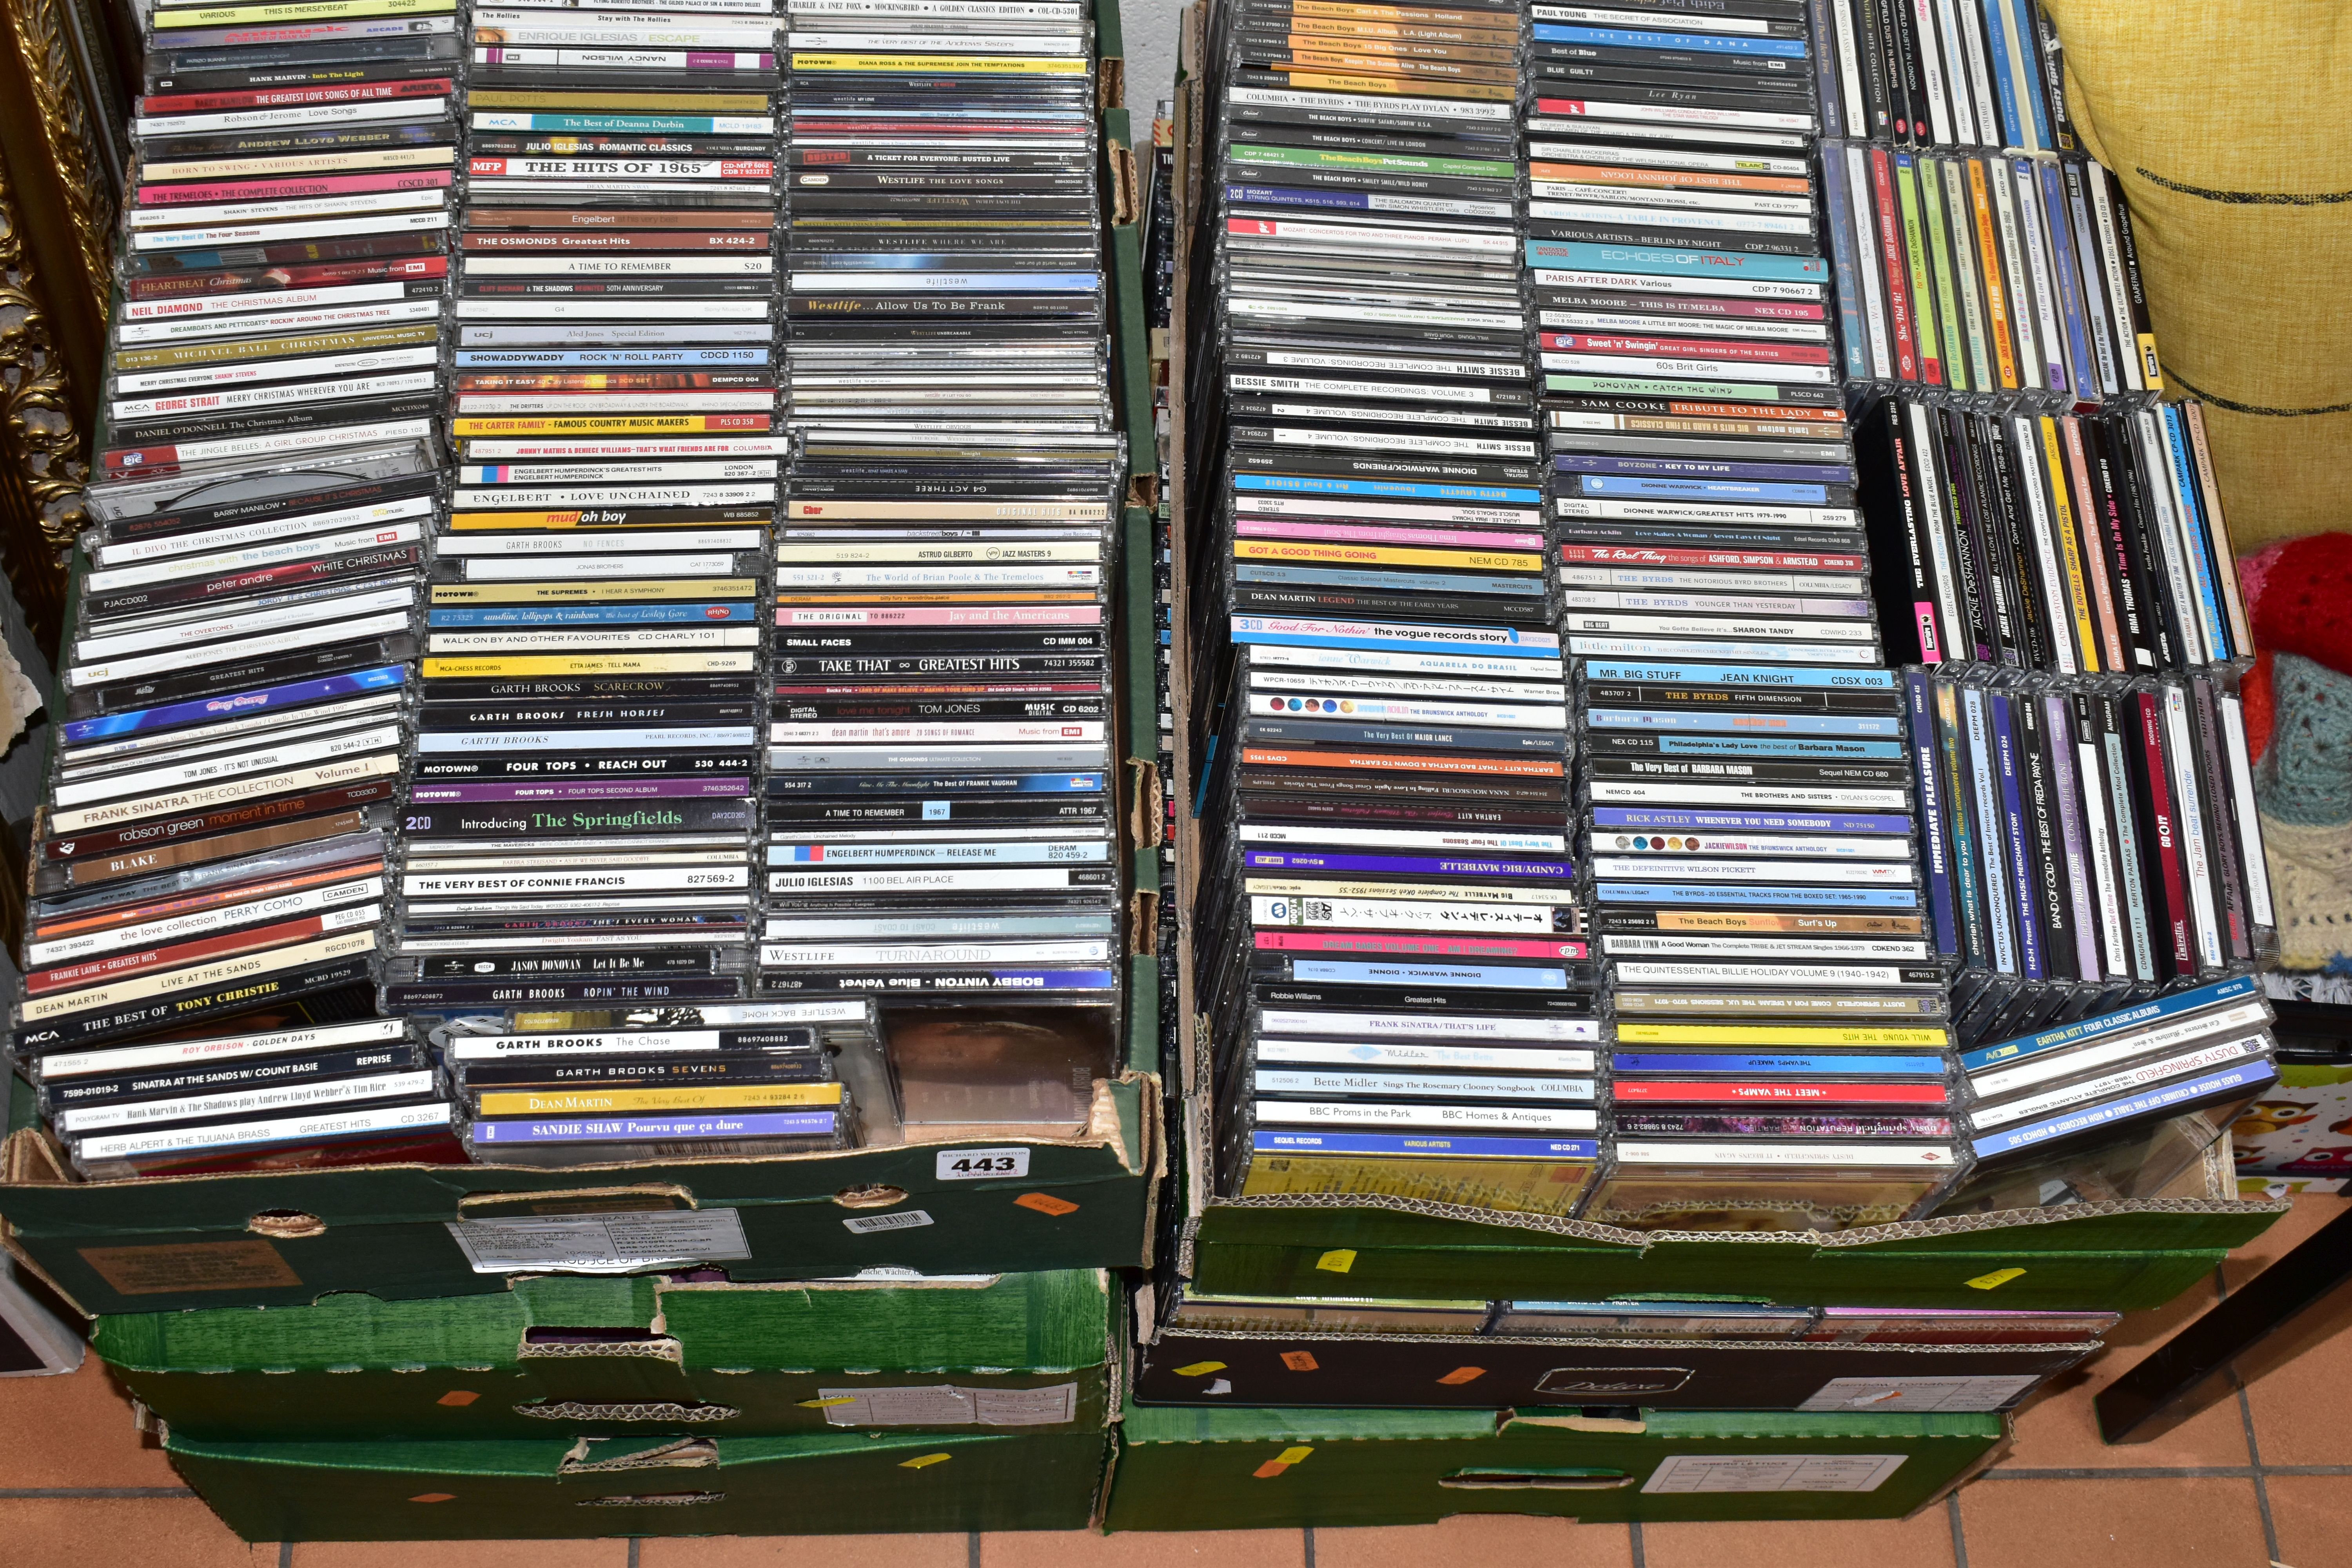 SIX BOXES OF CDS, to include approximately eight hundred CDs, with a mixture of genres and artists